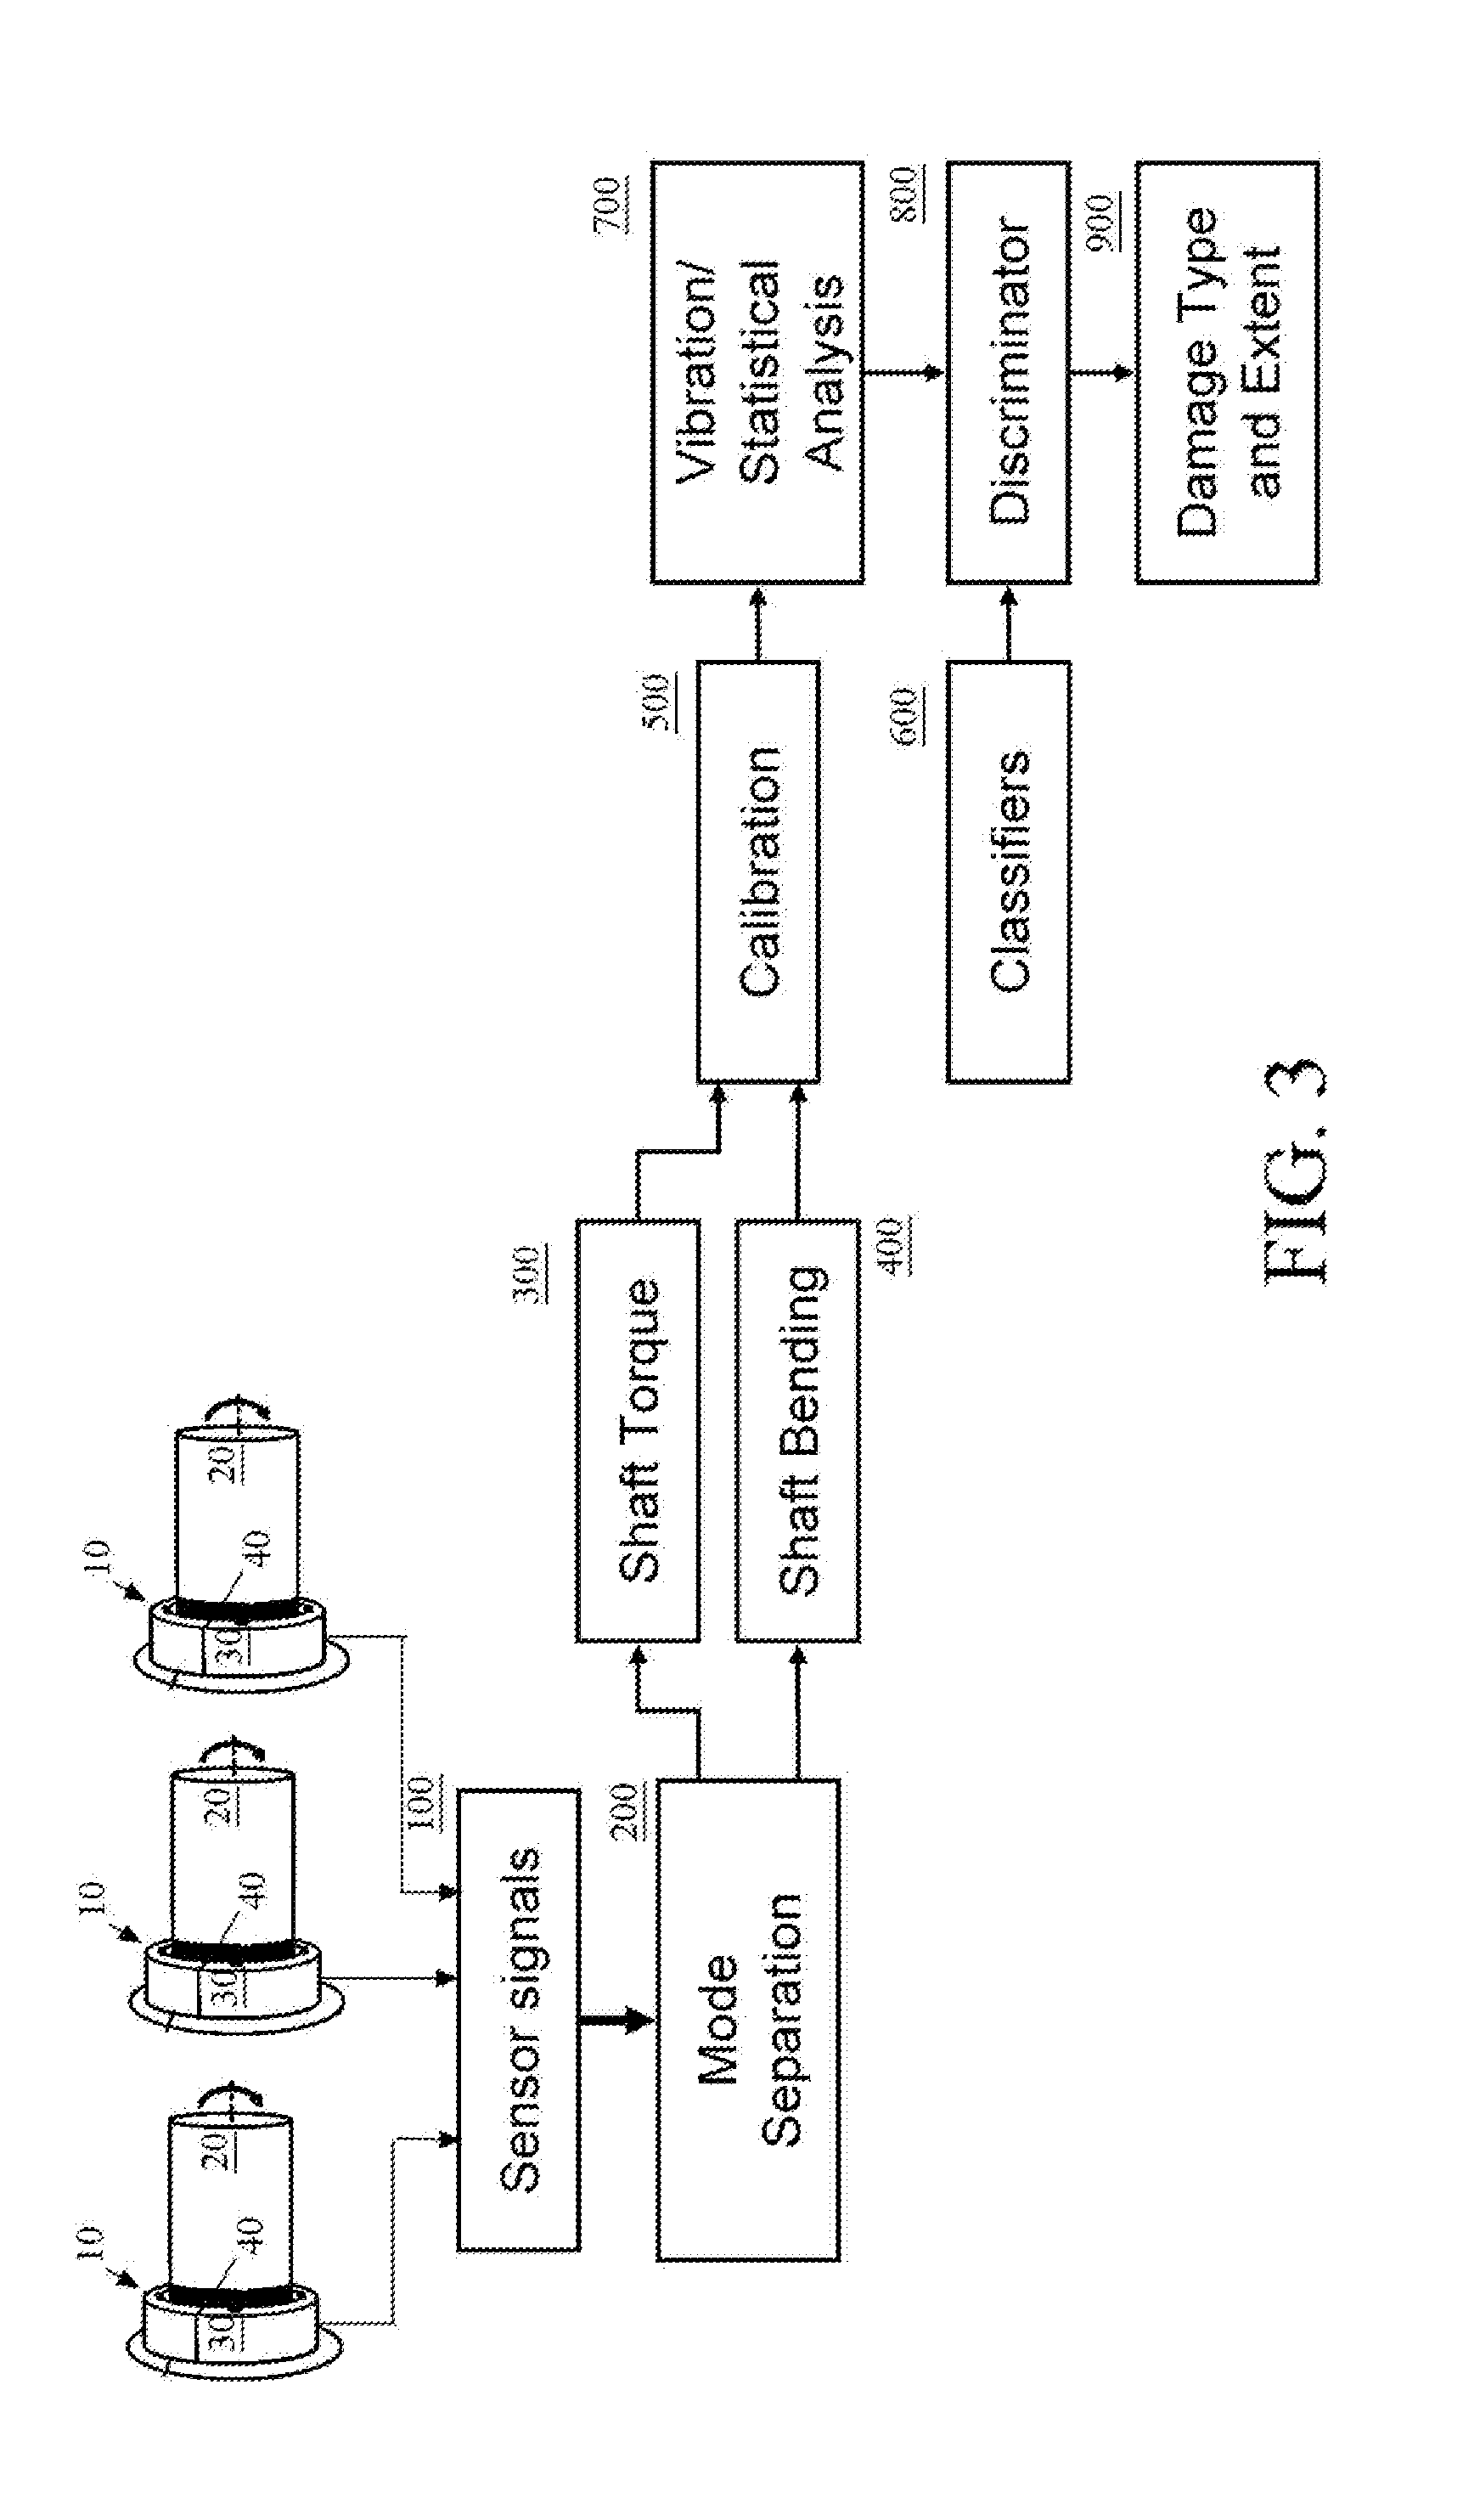 Apparatus and method for non contact sensing of forces and motion on rotating shaft